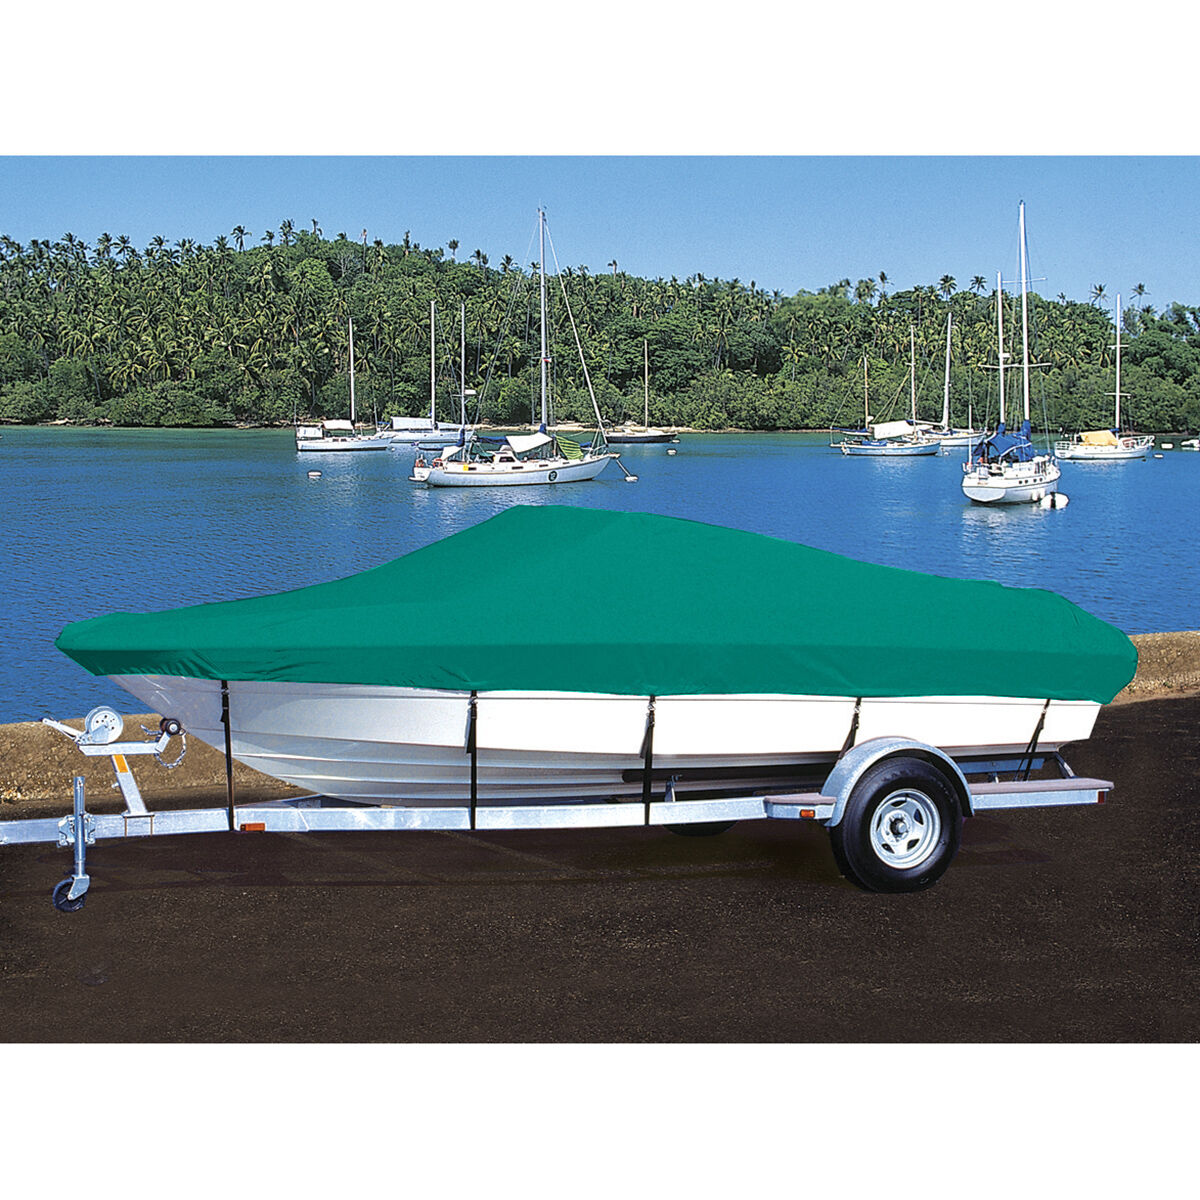 Taylor Made Trailerite Hot Shot Cover for 98-01 Klamath 14 Delux/SS/SR/ SC w/ Hood Boat Cover in Teal Polyester